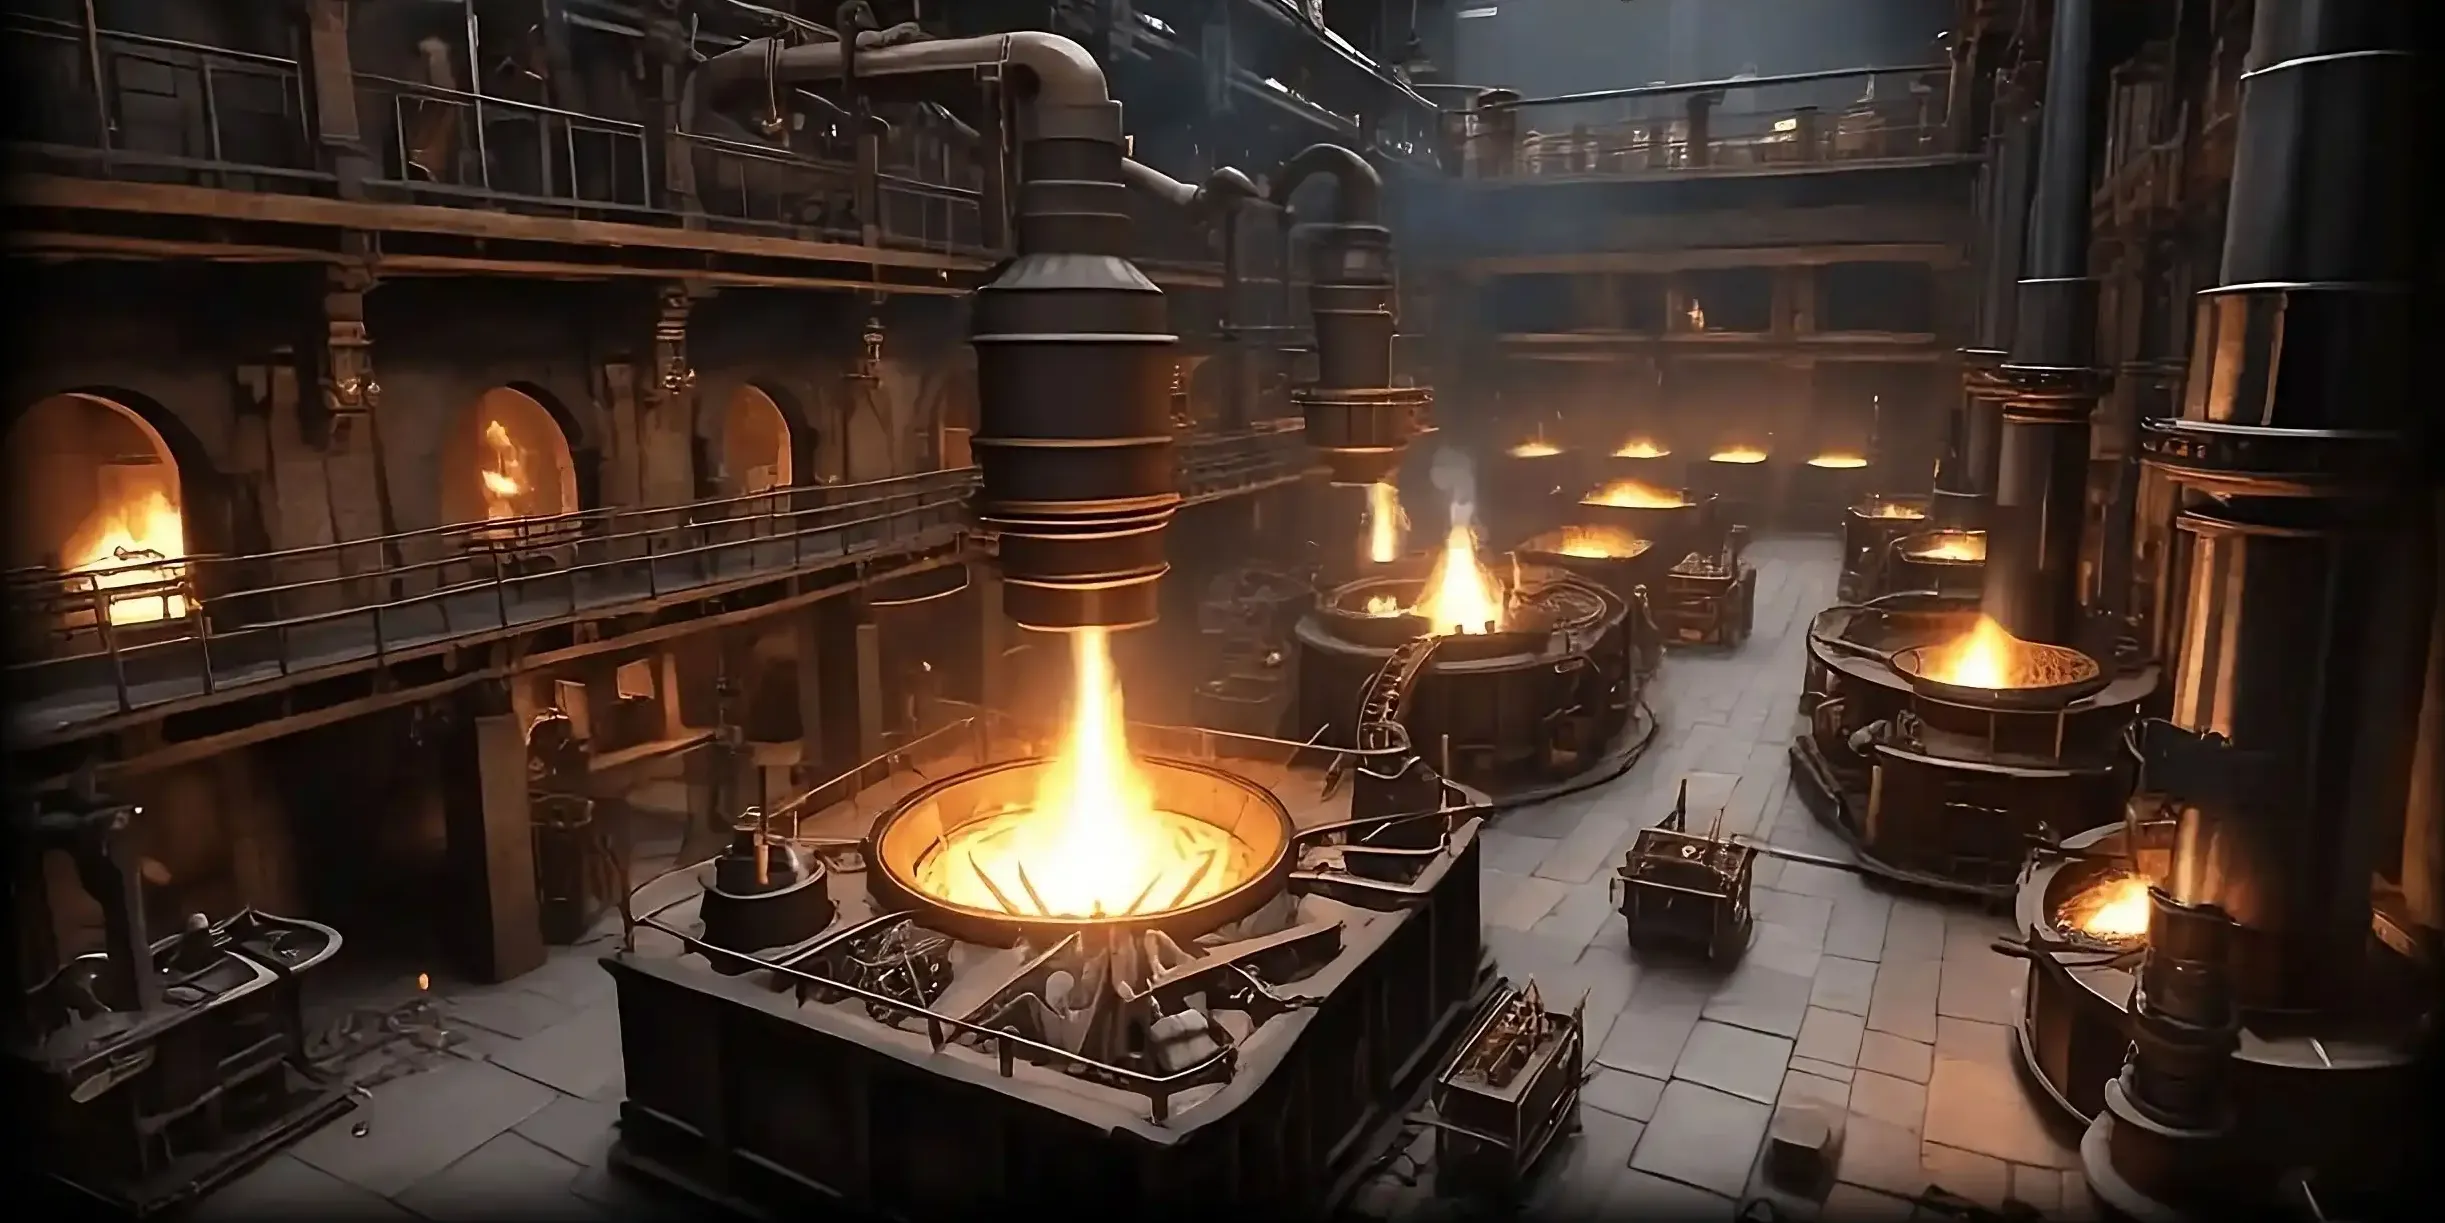 A view into a busy futuristic foundry, where molten metals are being poured into large vats ready for manufacture